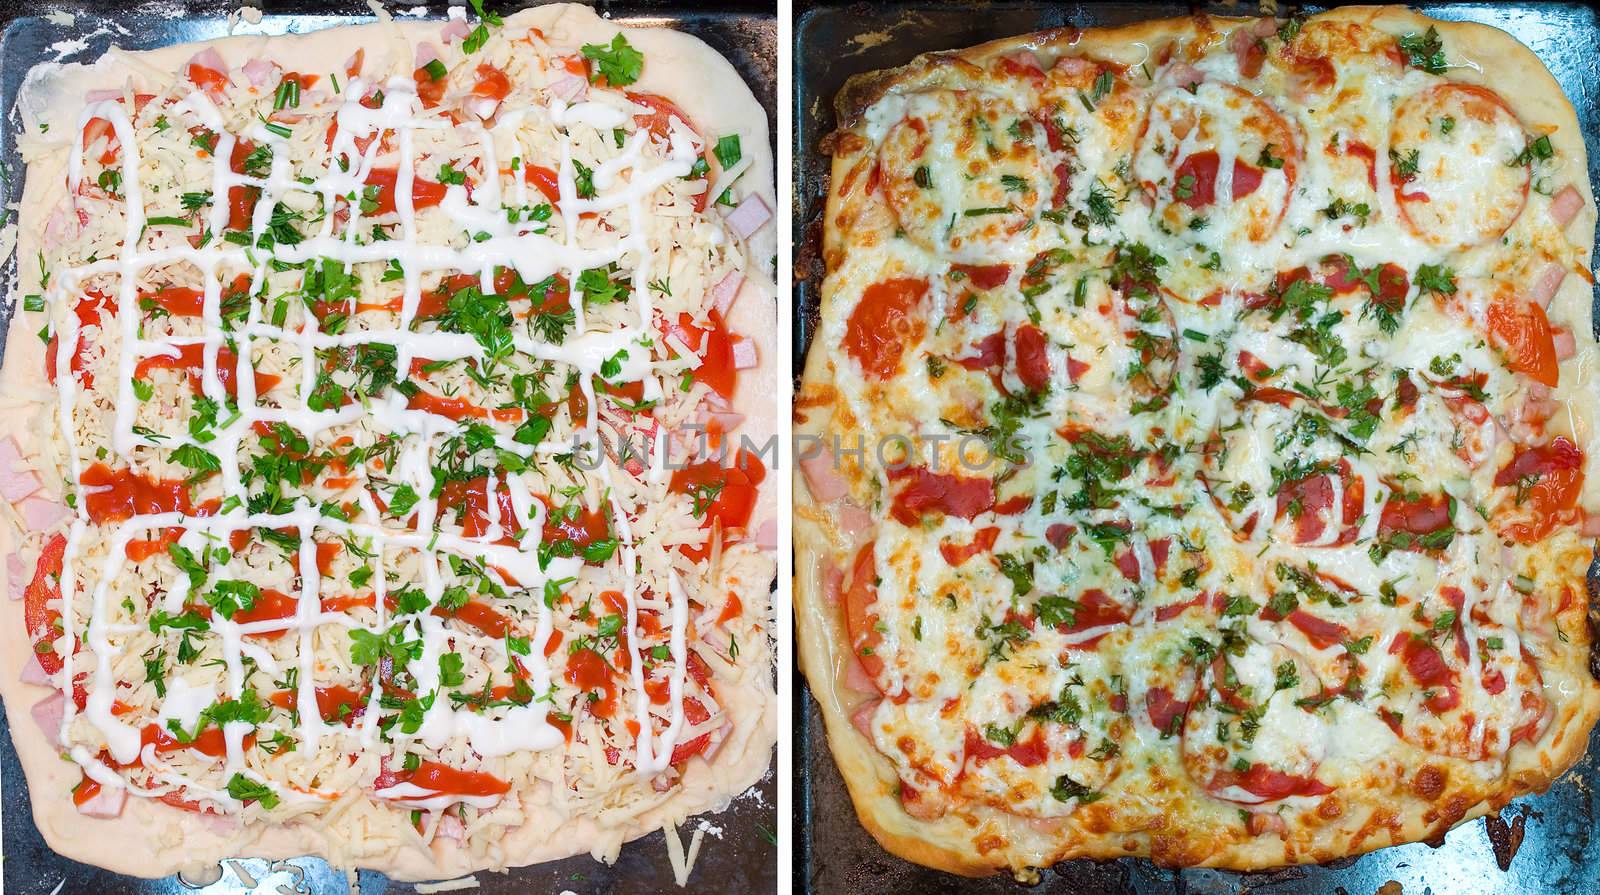 pizza before and after bake, from two shots